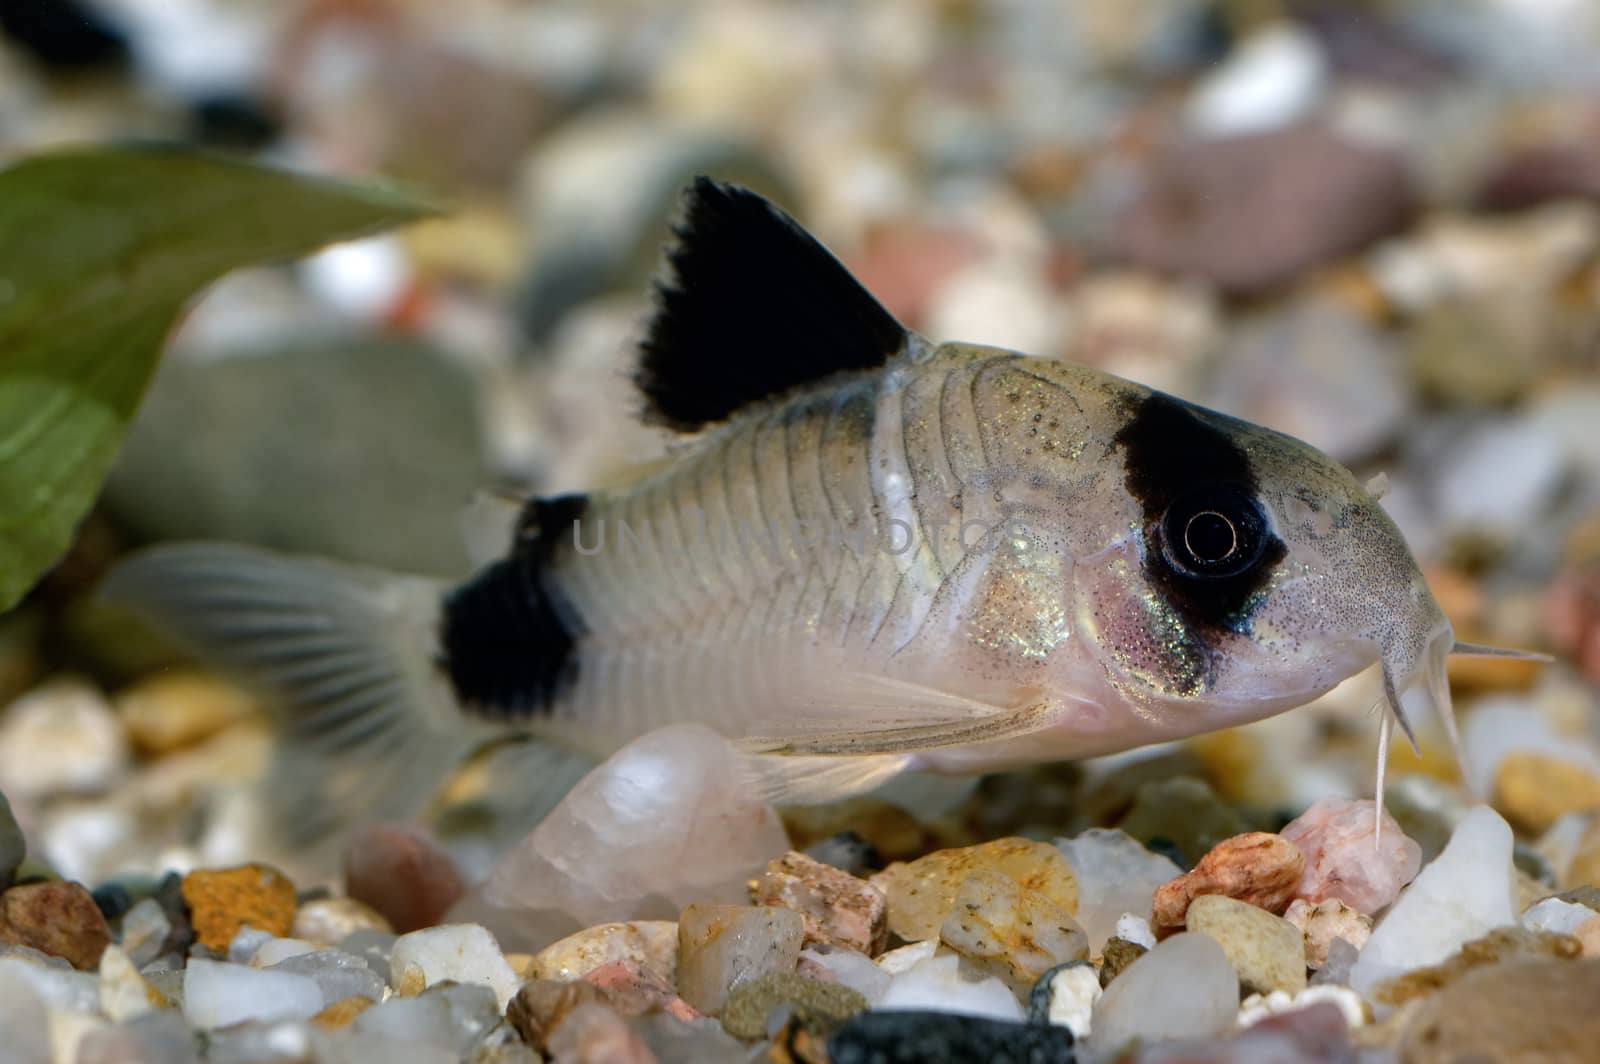 Corydoras fish on the bottom and in the aquarium.